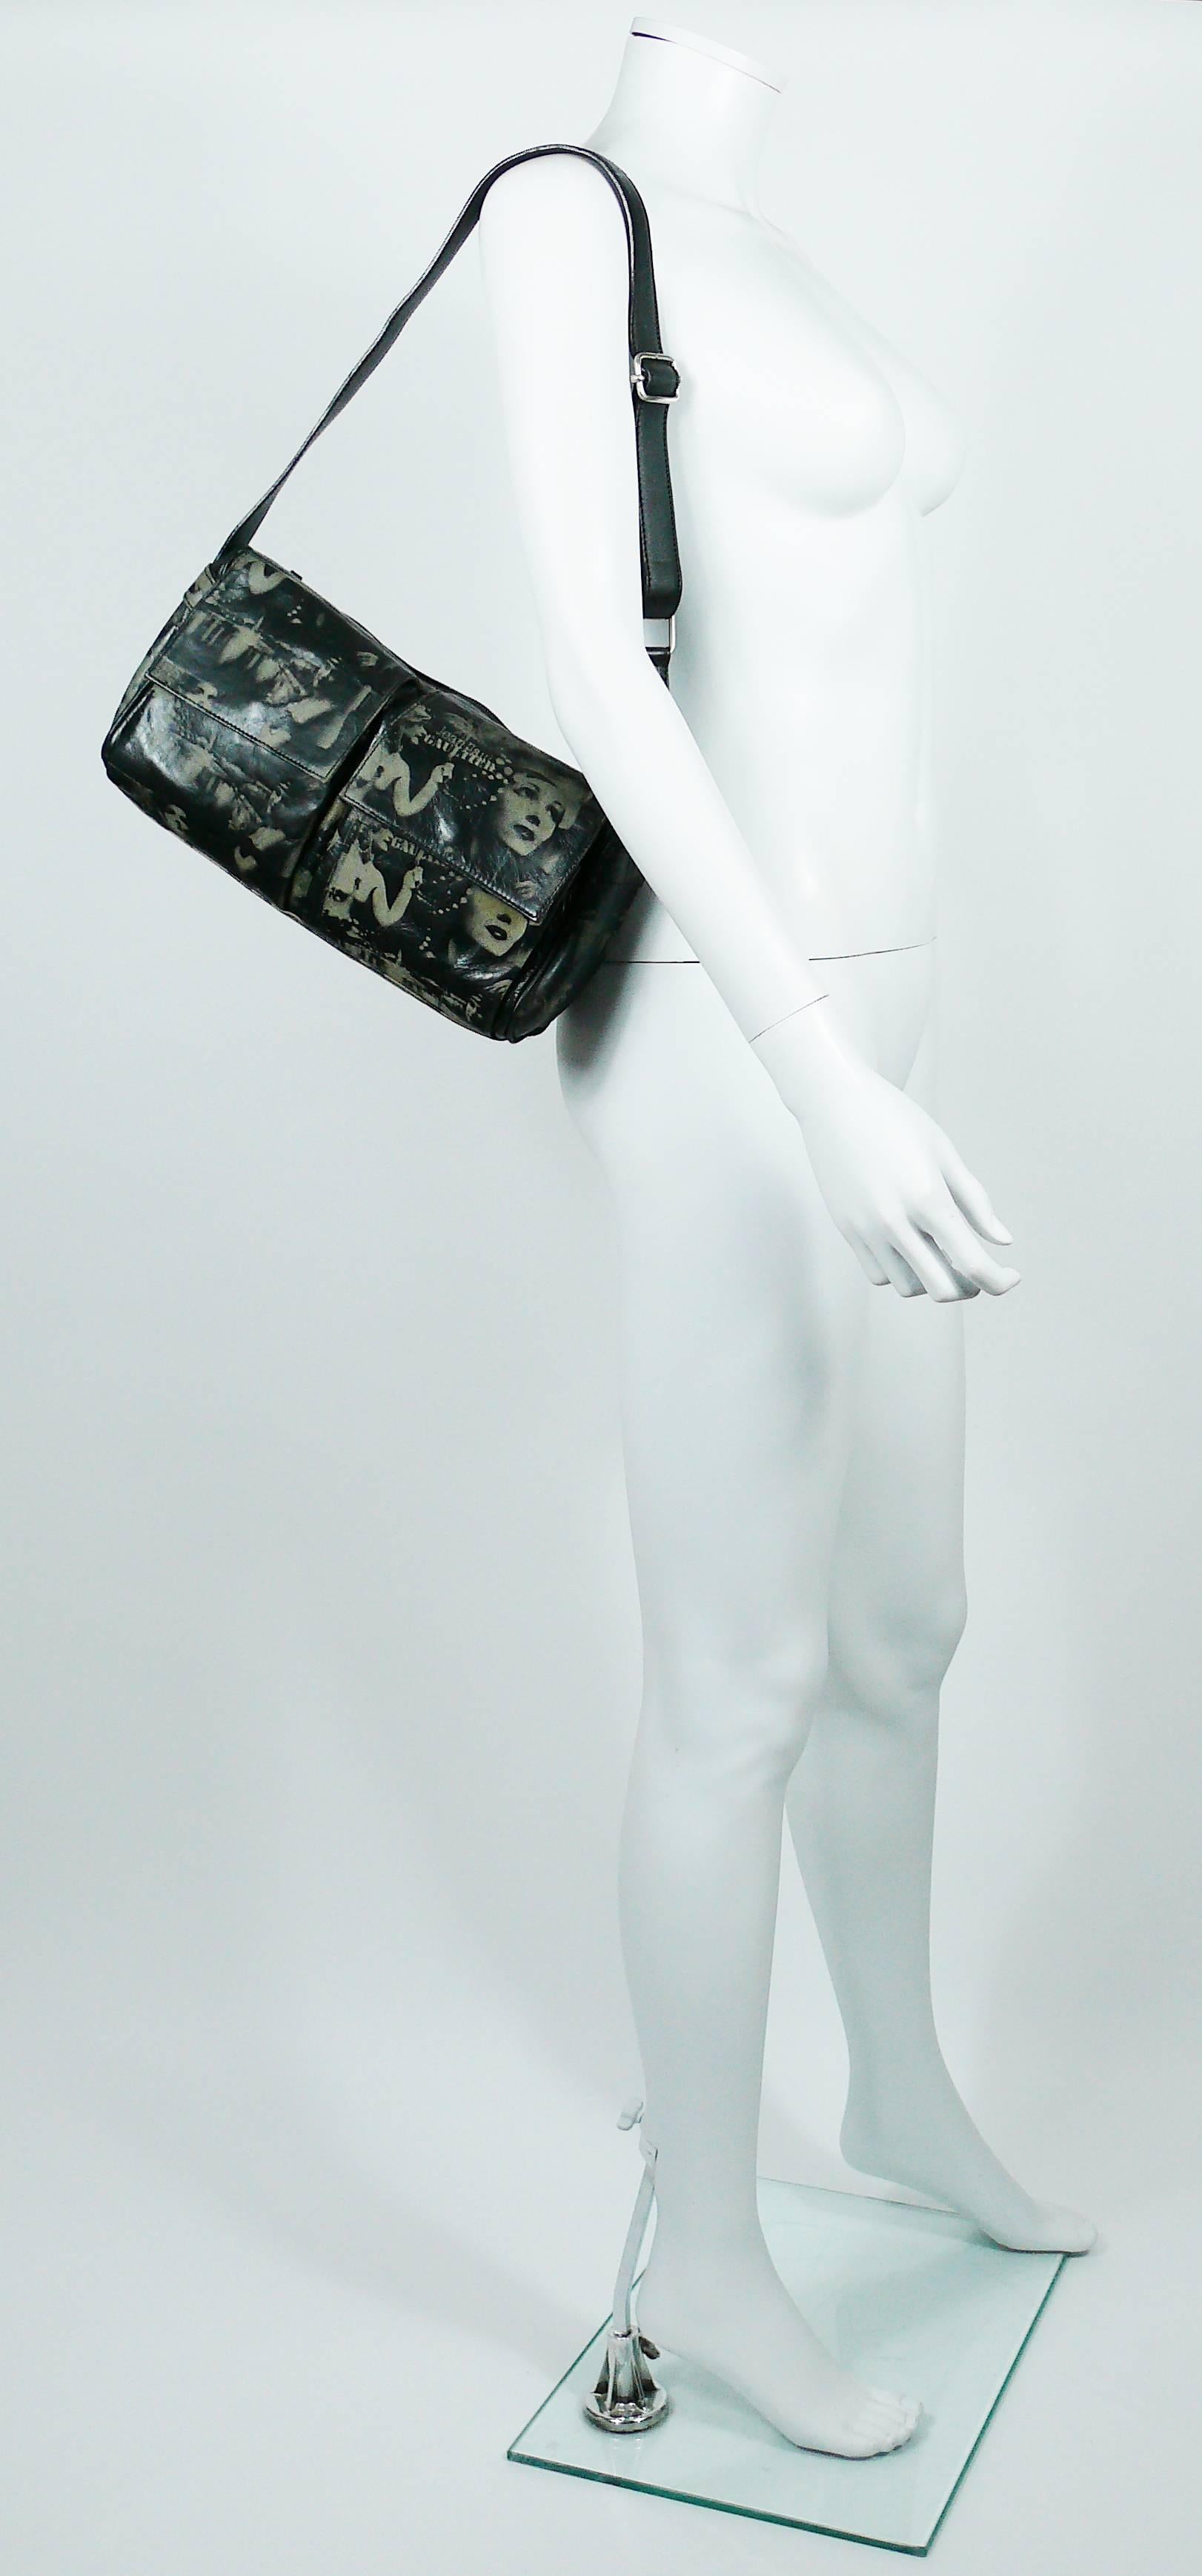 JEAN PAUL GAULTIER vintage leather shoulder bag printed with a gorgeous retro design featuring MARLENE DIETRICH looking faces, 1920s women and JEAN PAUL GAULTIER logos.

This bag features :
- Rectangular shape.
- Two front pocket featuring hidden